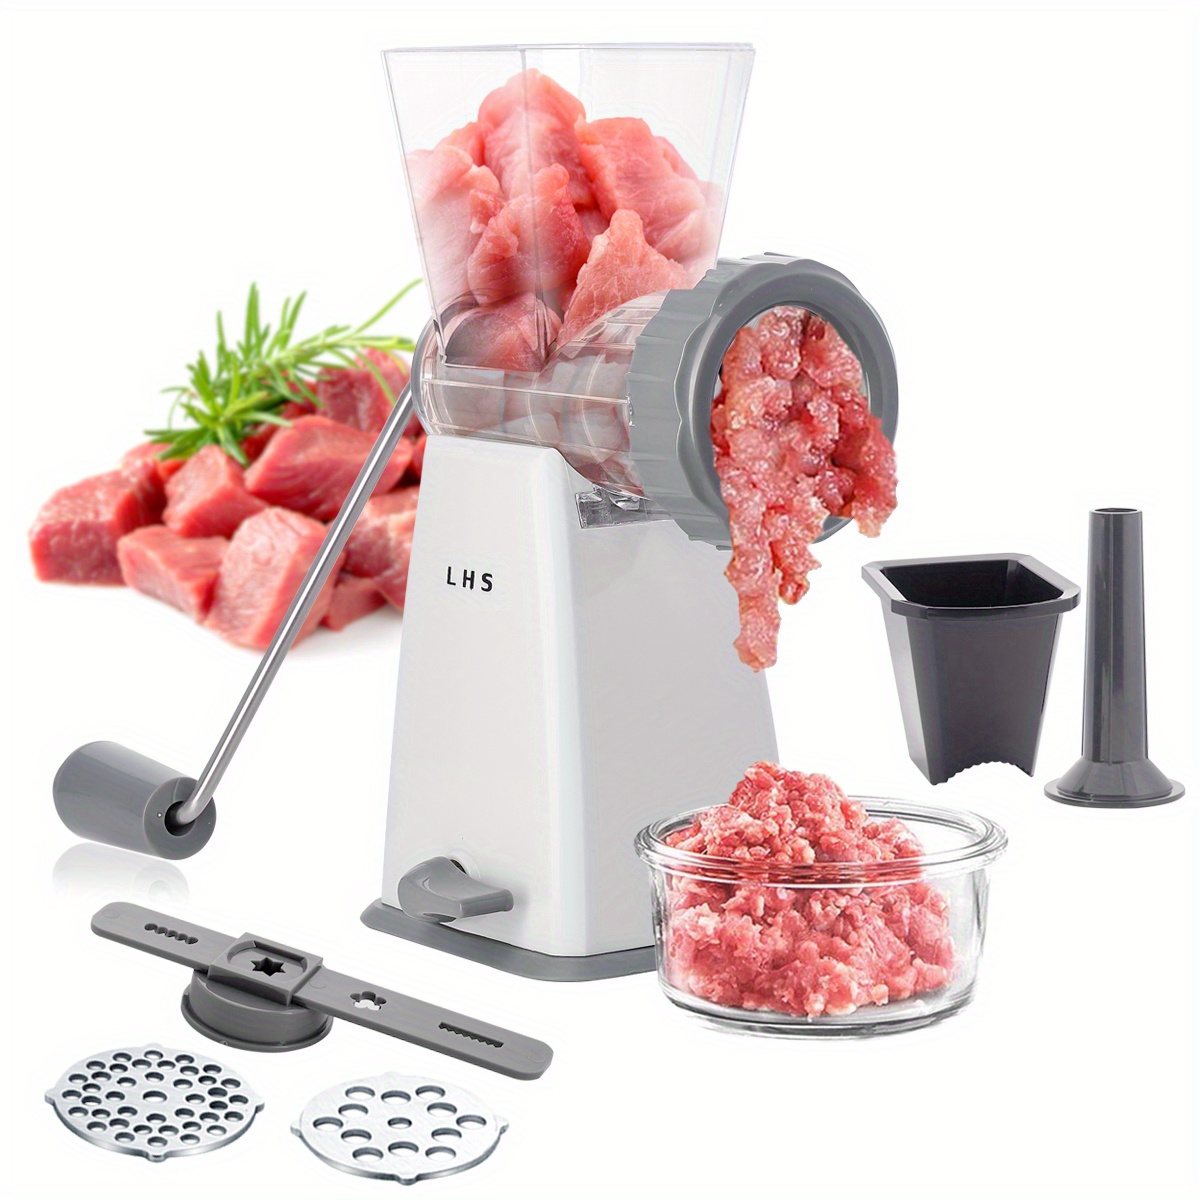 LHS Manual Meat Grinder, Heavy Duty Meat Mincer Sausage Stuffer, 3-in-1  Hand Grinder with Stainless Steel Blades for Meat, Sausage, Cookies, Easy  to